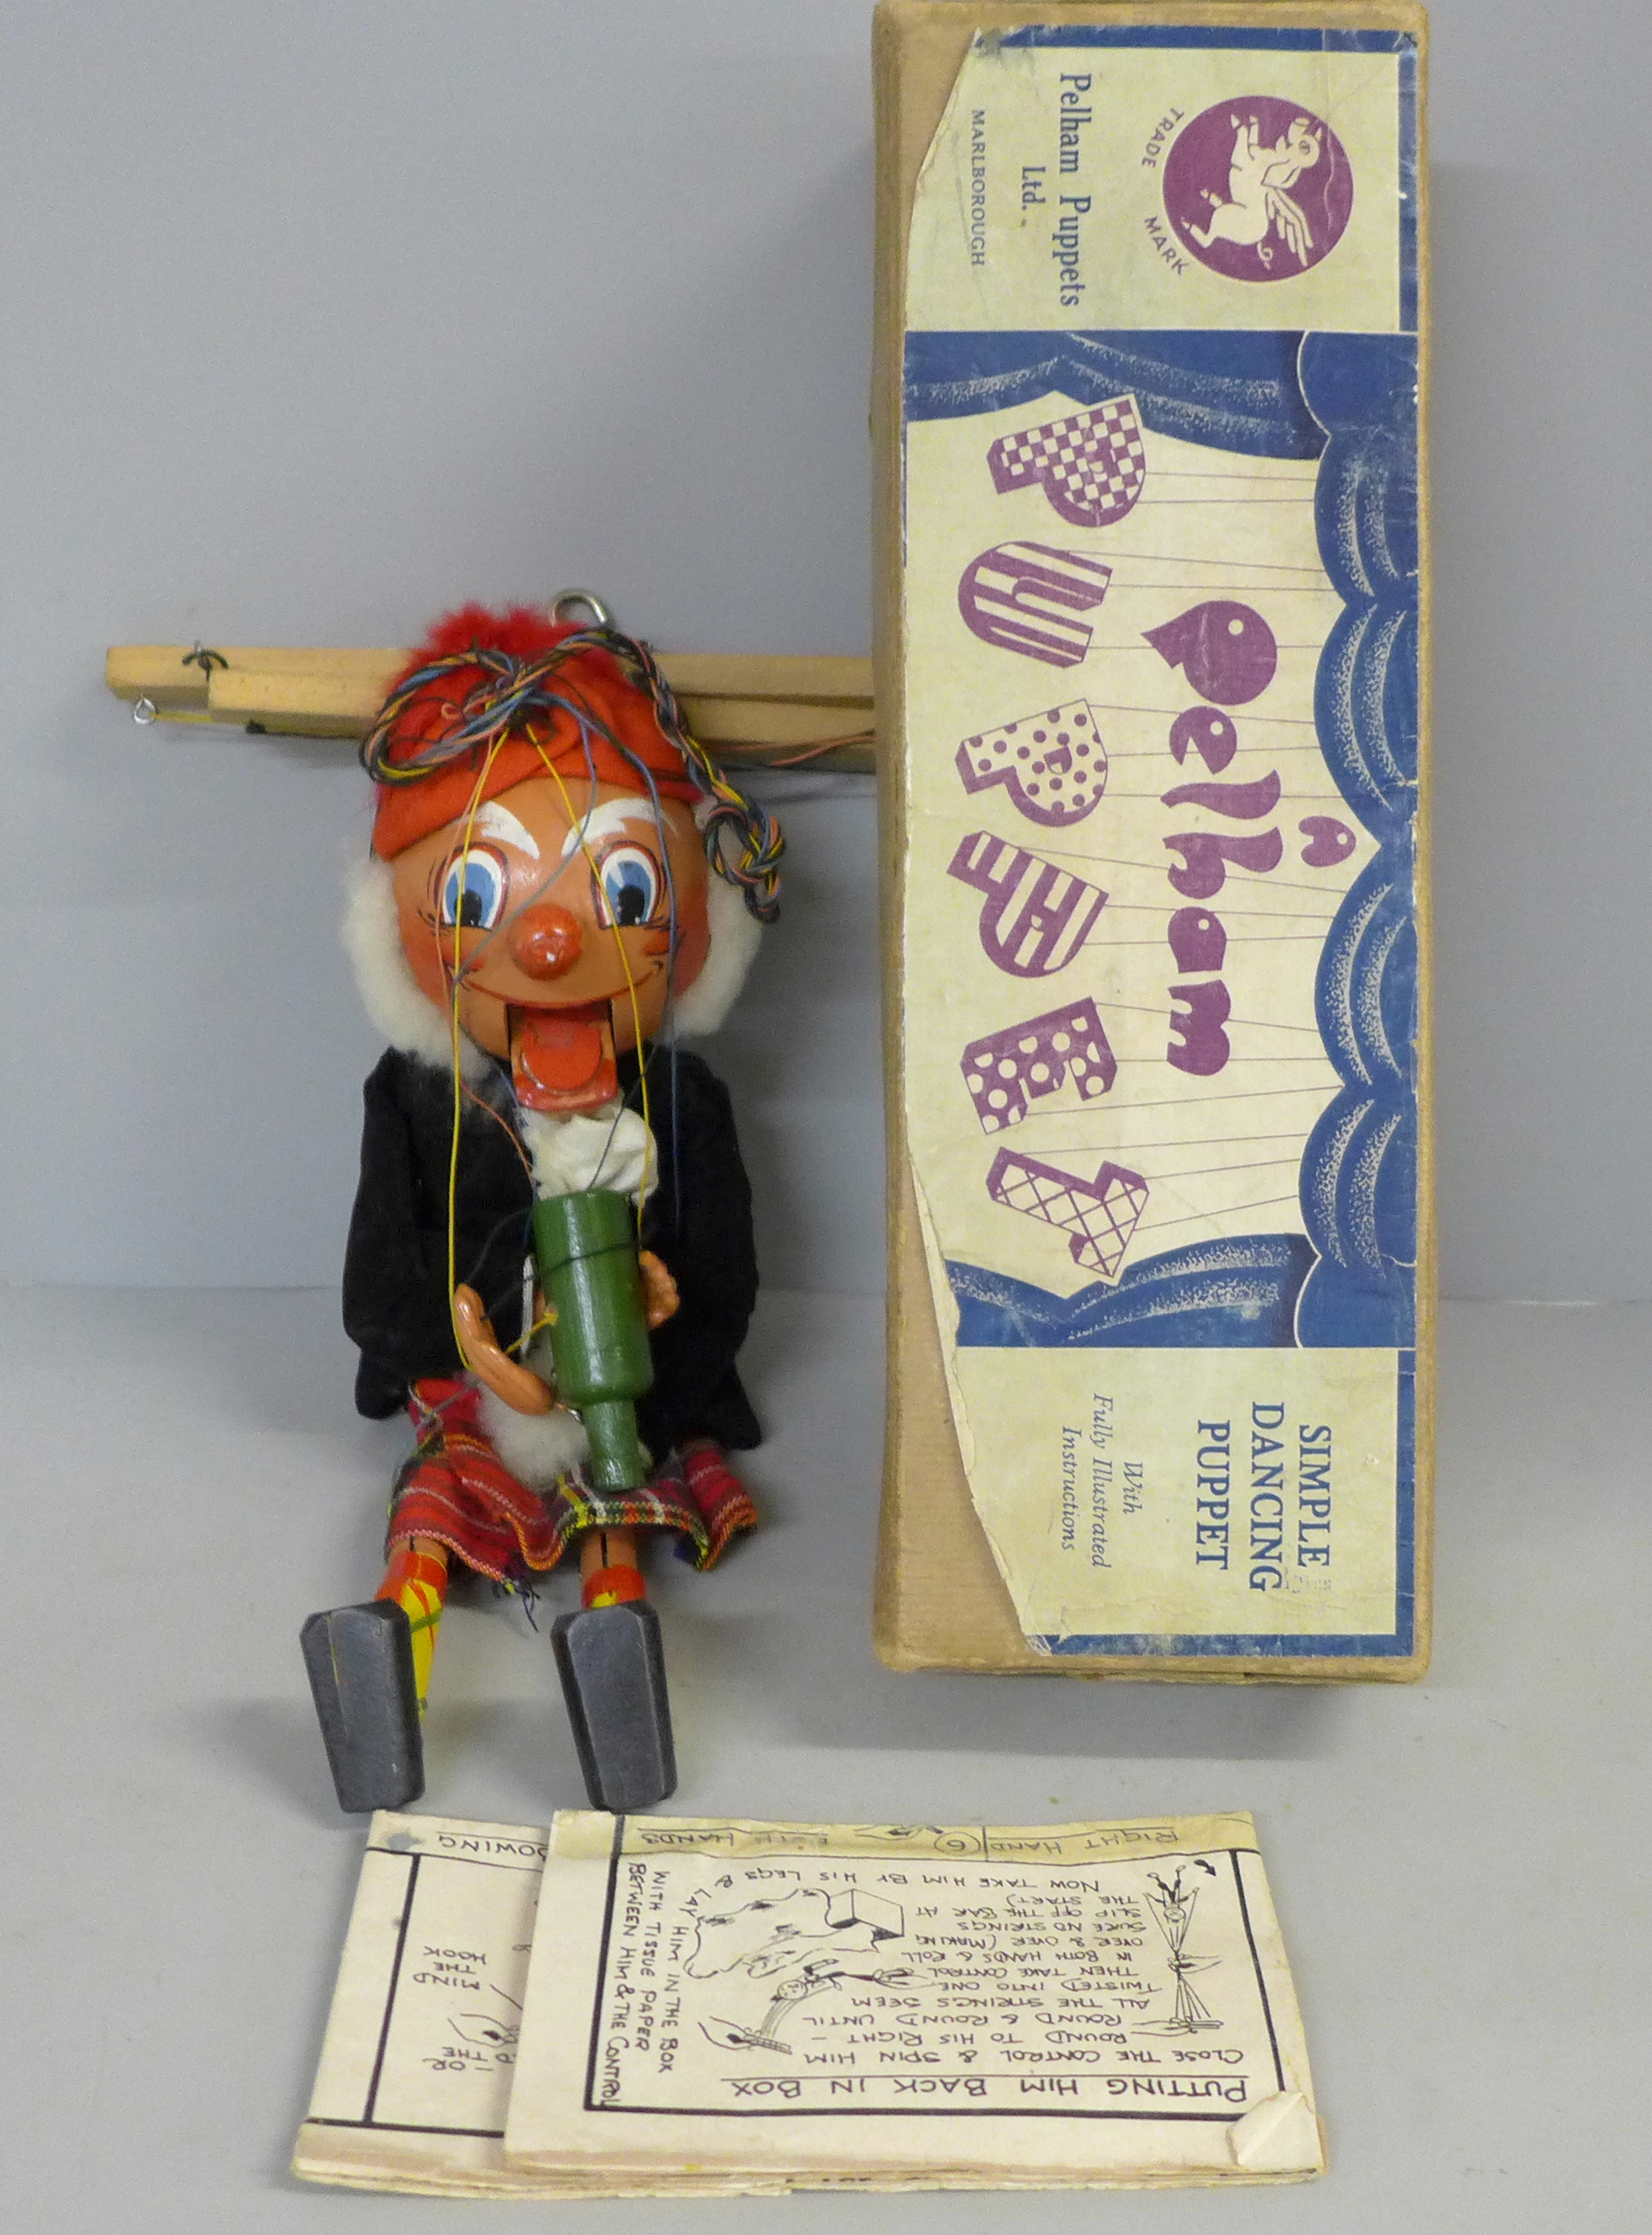 An early Pelham puppet, boxed with instructions